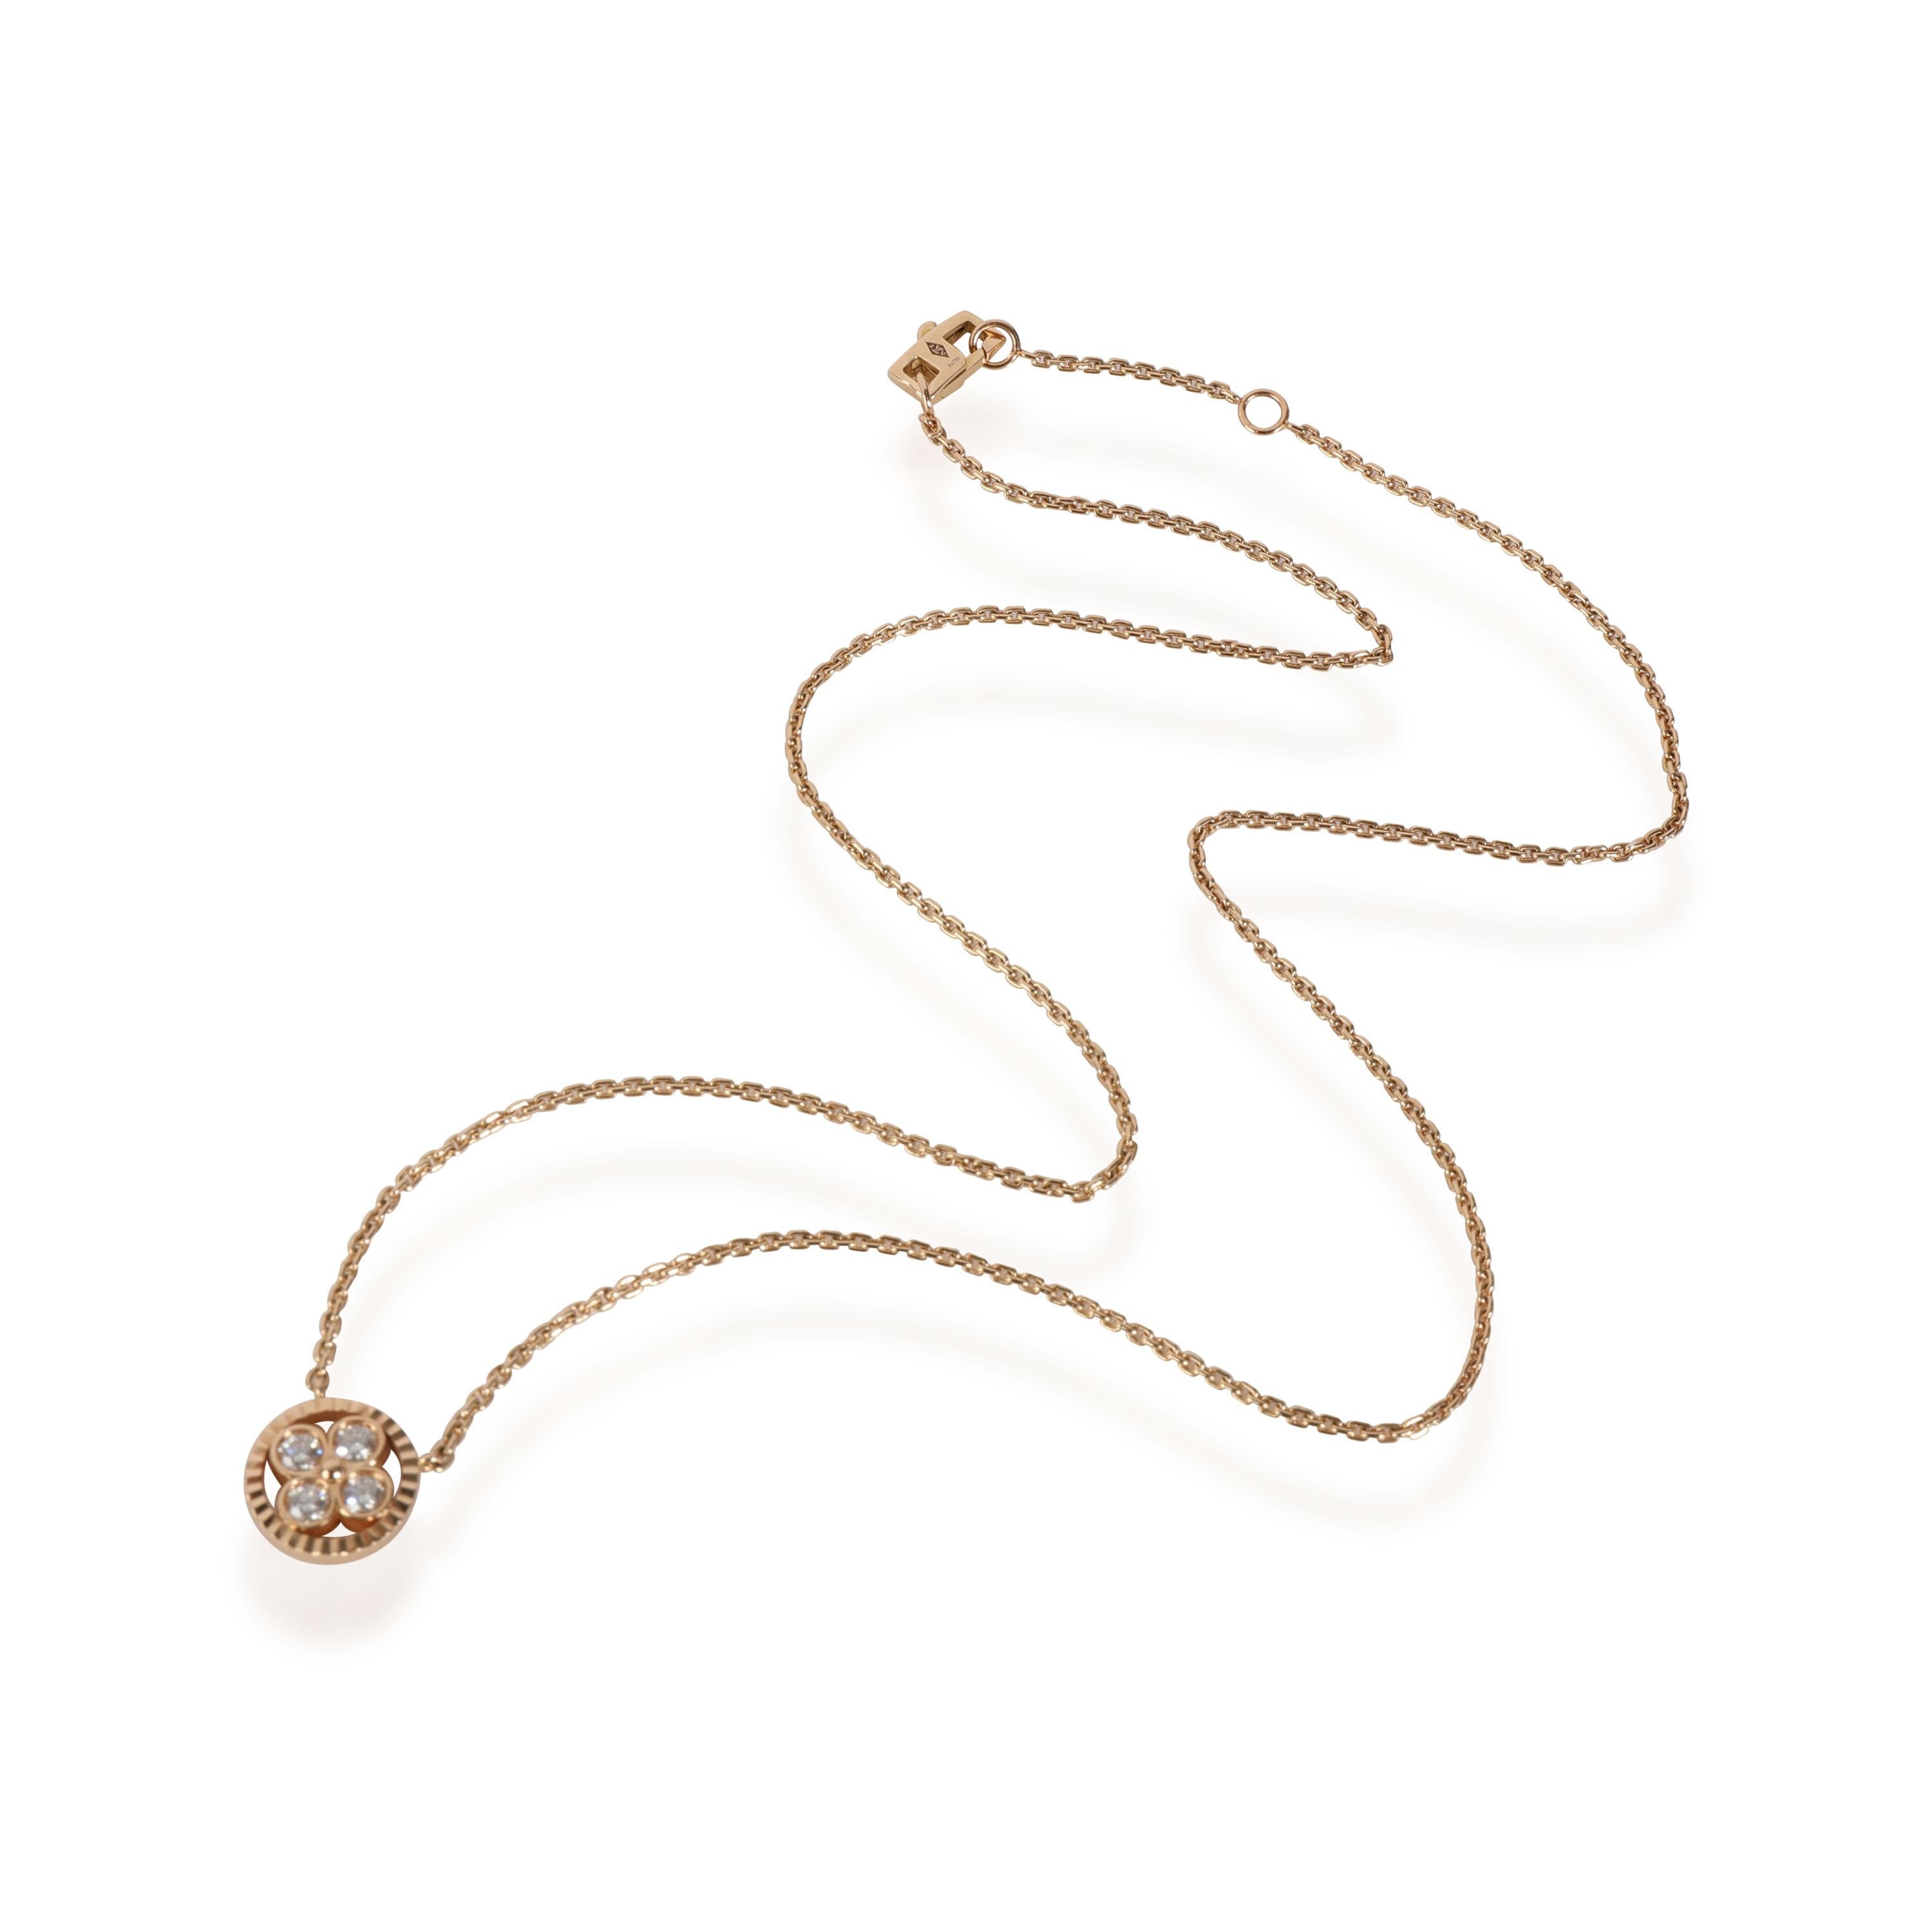 Louis Vuitton Blossom BB Diamond Pendant in 18K Rose Gold 0.2 CTW

PRIMARY DETAILS
SKU: 114304
Listing Title: Louis Vuitton Blossom BB Diamond Pendant in 18K Rose Gold 0.2 CTW
Condition Description: Chain length is adjustable. Retails for 4550 USD.